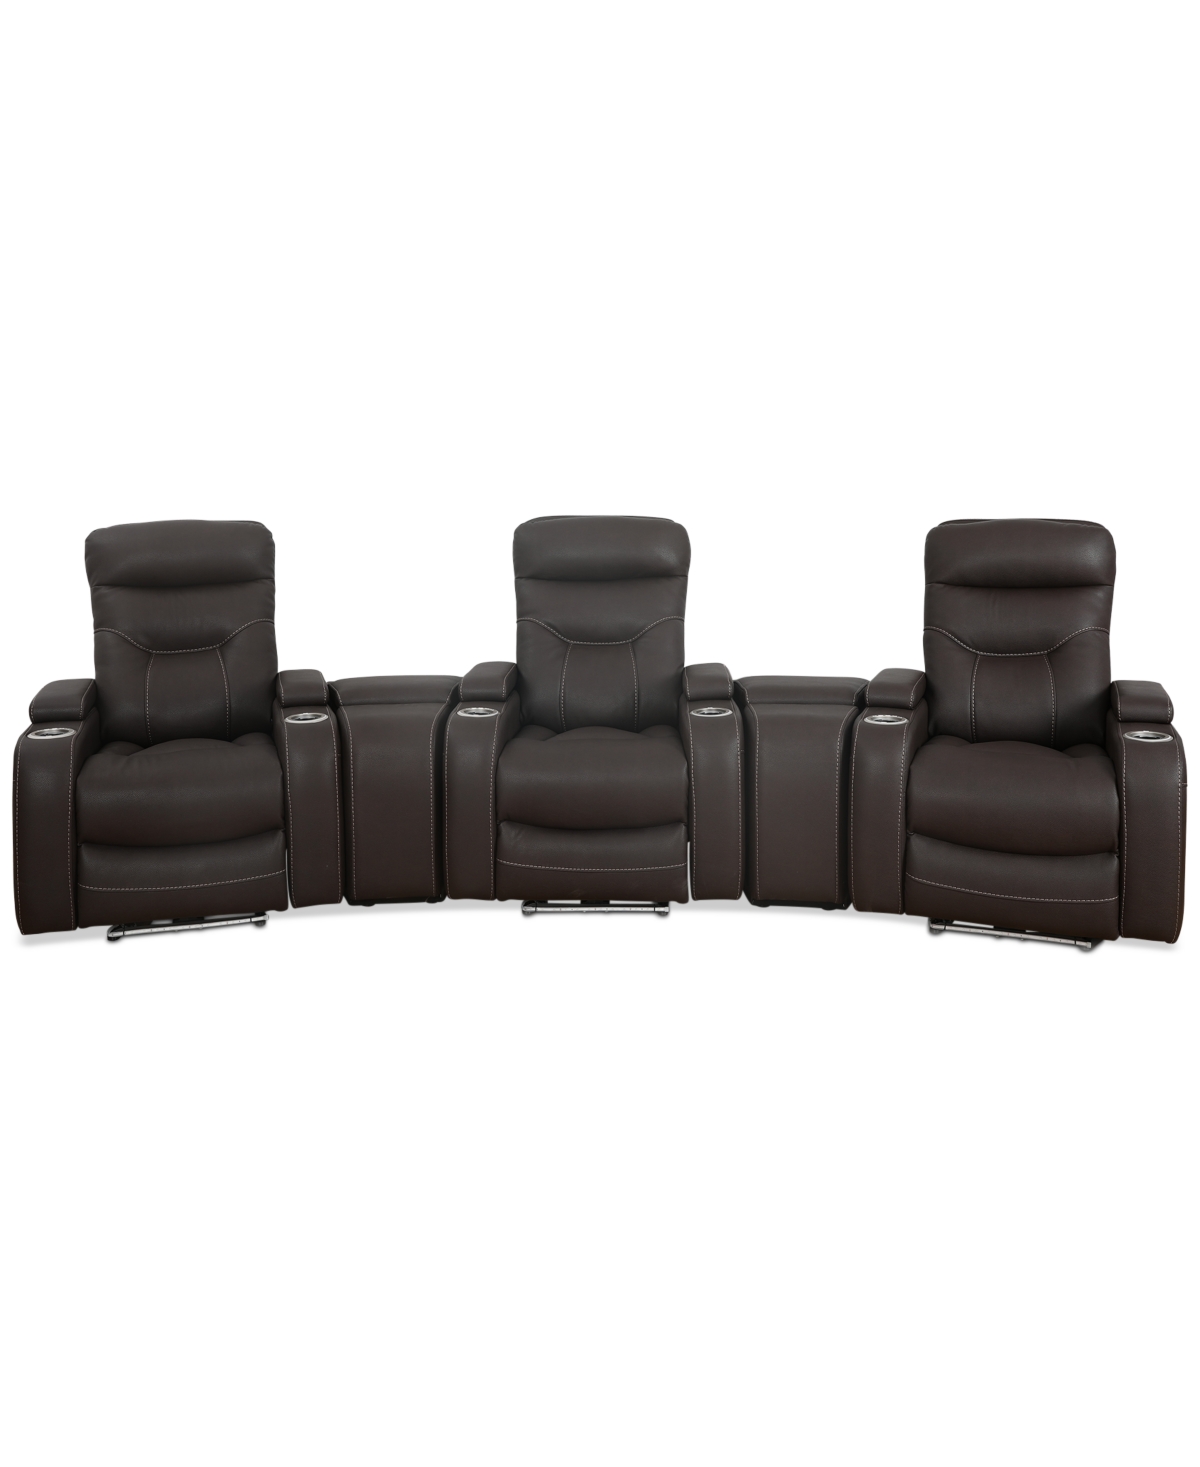 Furniture Jabarr 5-pc. Beyond Leather Theater Seating With 2 Consoles, Created For Macy's In Dark Brown